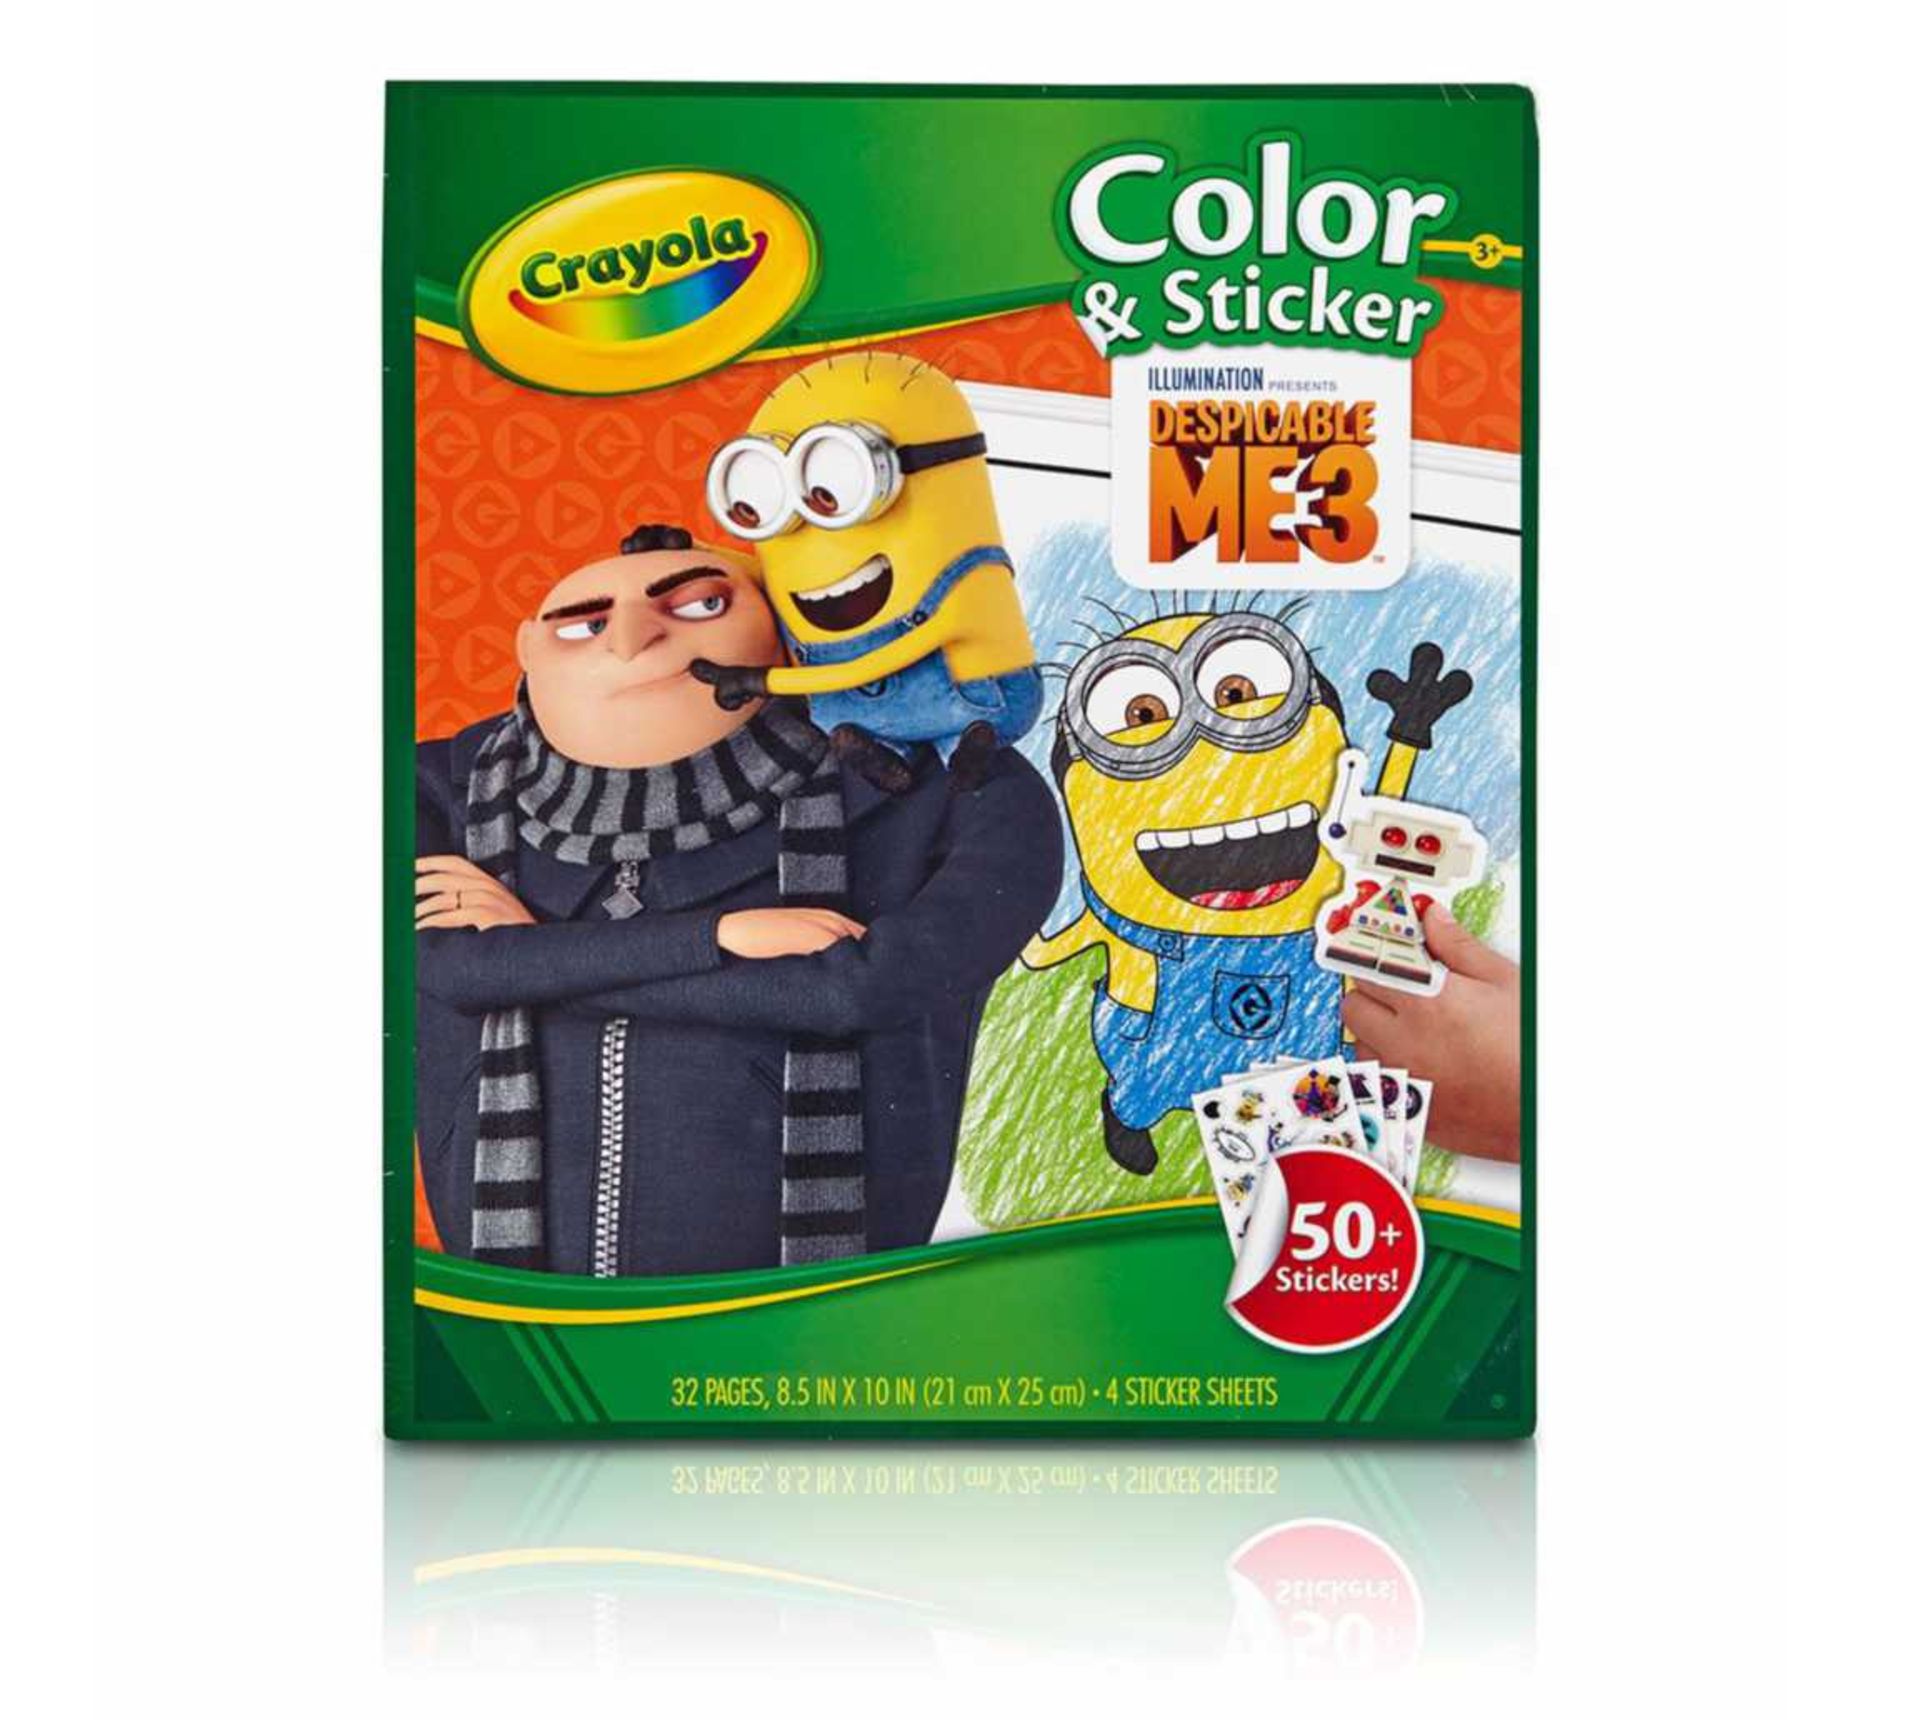 100pcs Brand new Despicable Me 3 Activity colouring in book and stickers set - 100pcs in lot brand